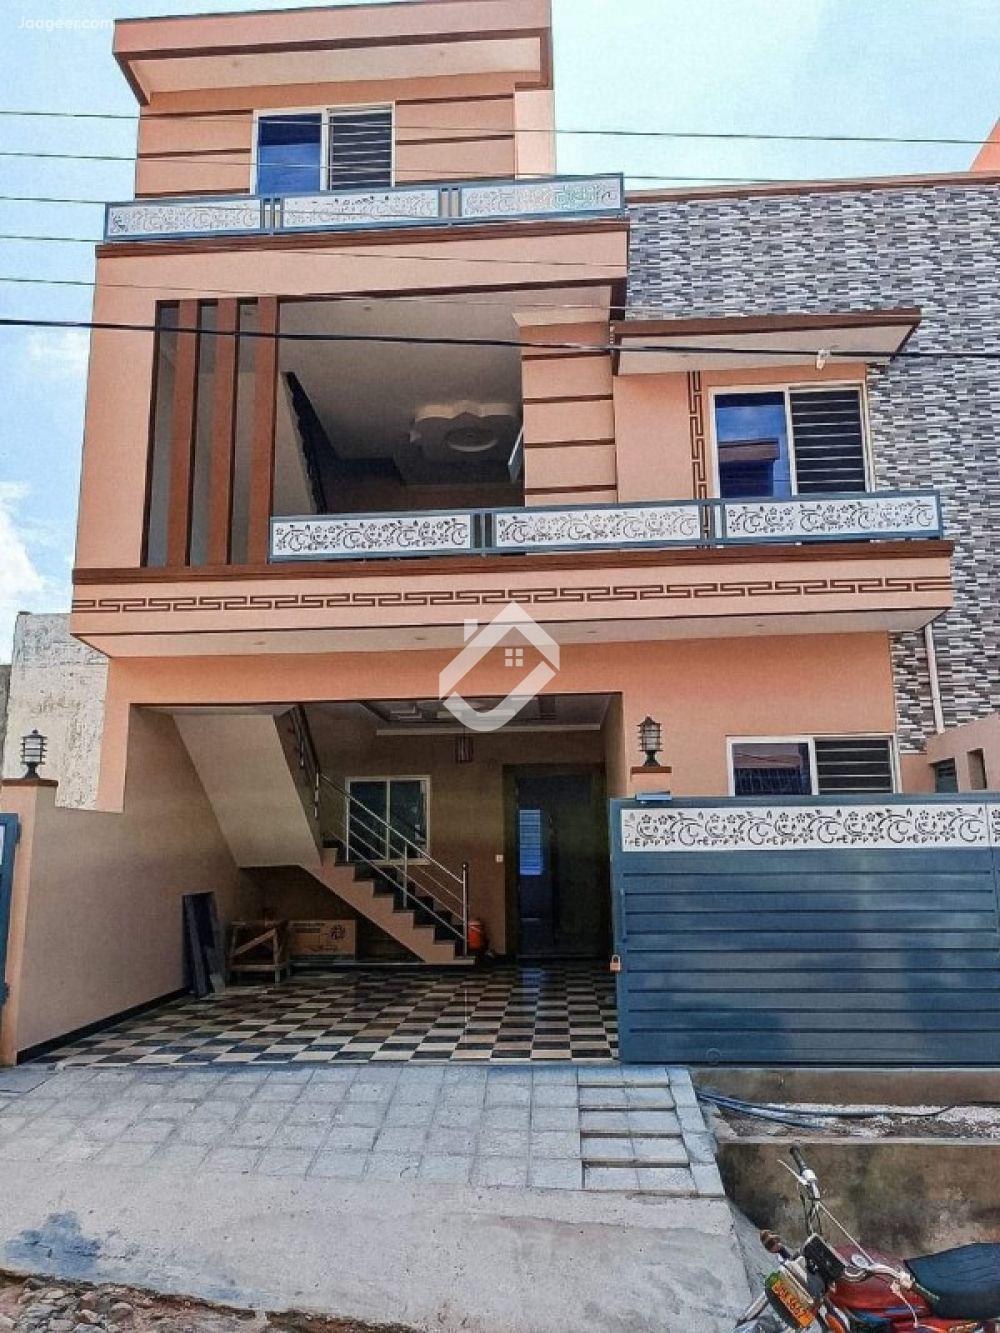 View  6 Marla Double Storey House For Sale In Airport Housing Society in Airport Housing Society, Rawalpindi